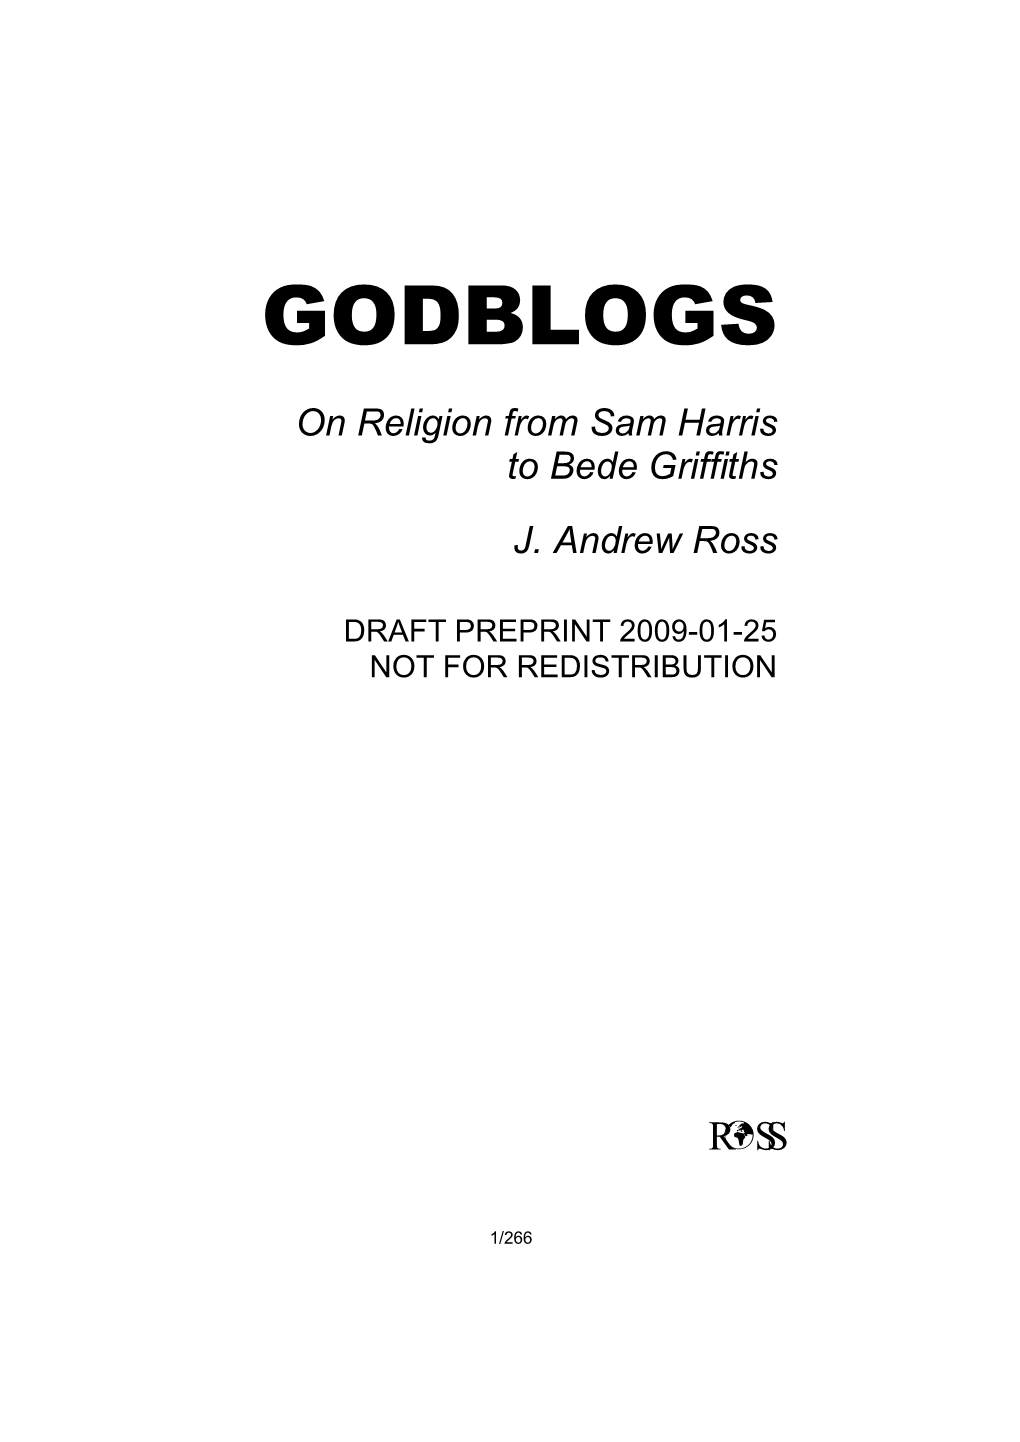 GODBLOGS on Religion from Sam Harris to Bede Griffiths J